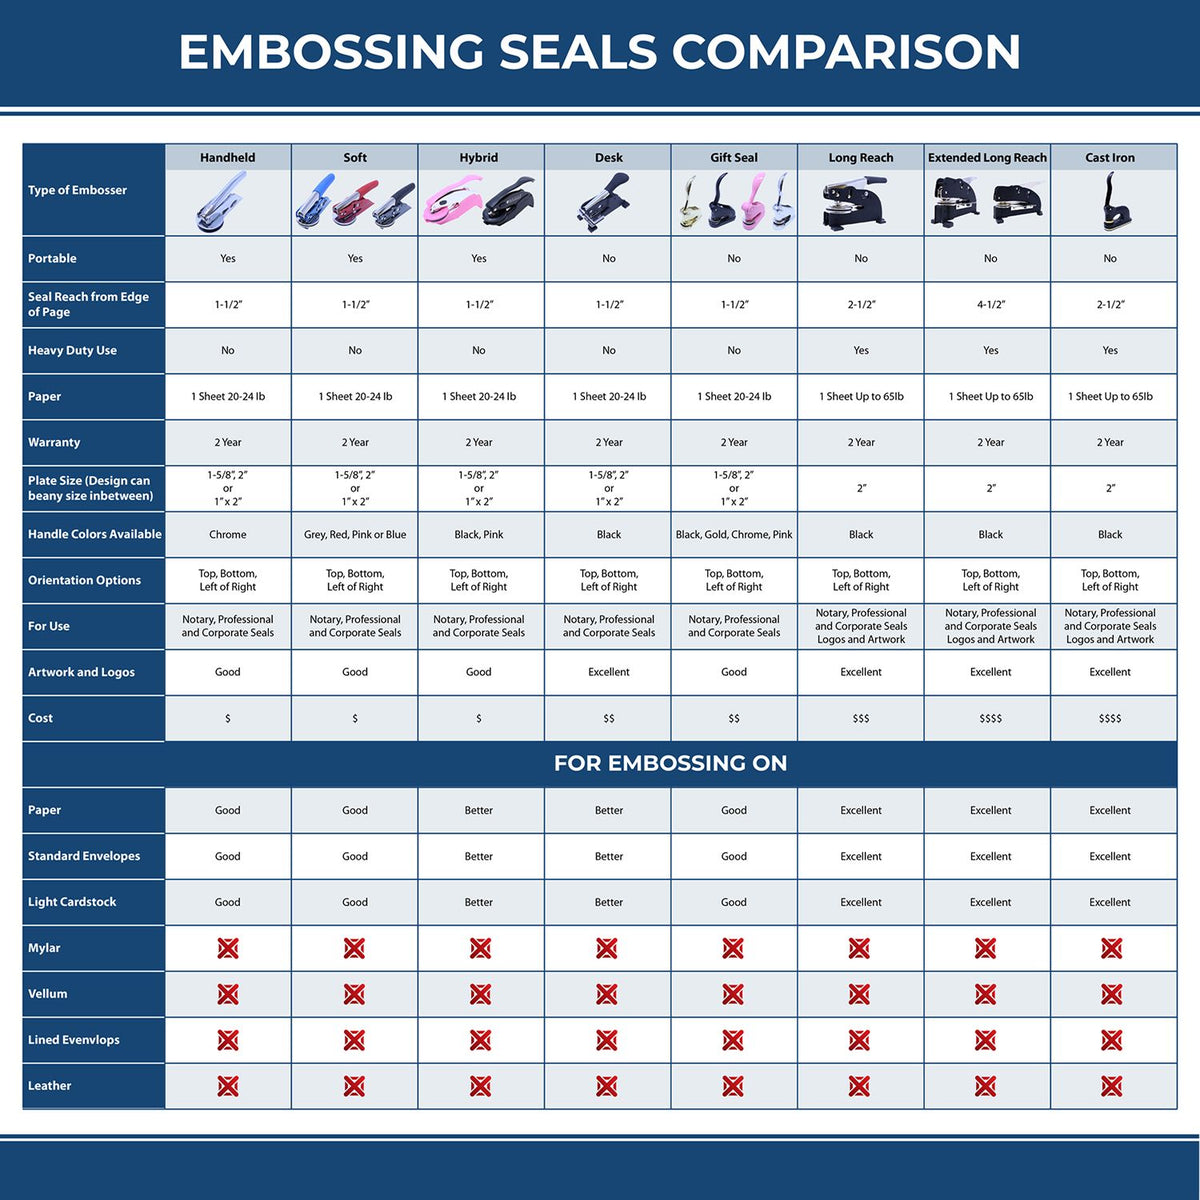 A comparison chart for the different types of mount models available for the Handheld Idaho Professional Geologist Embosser